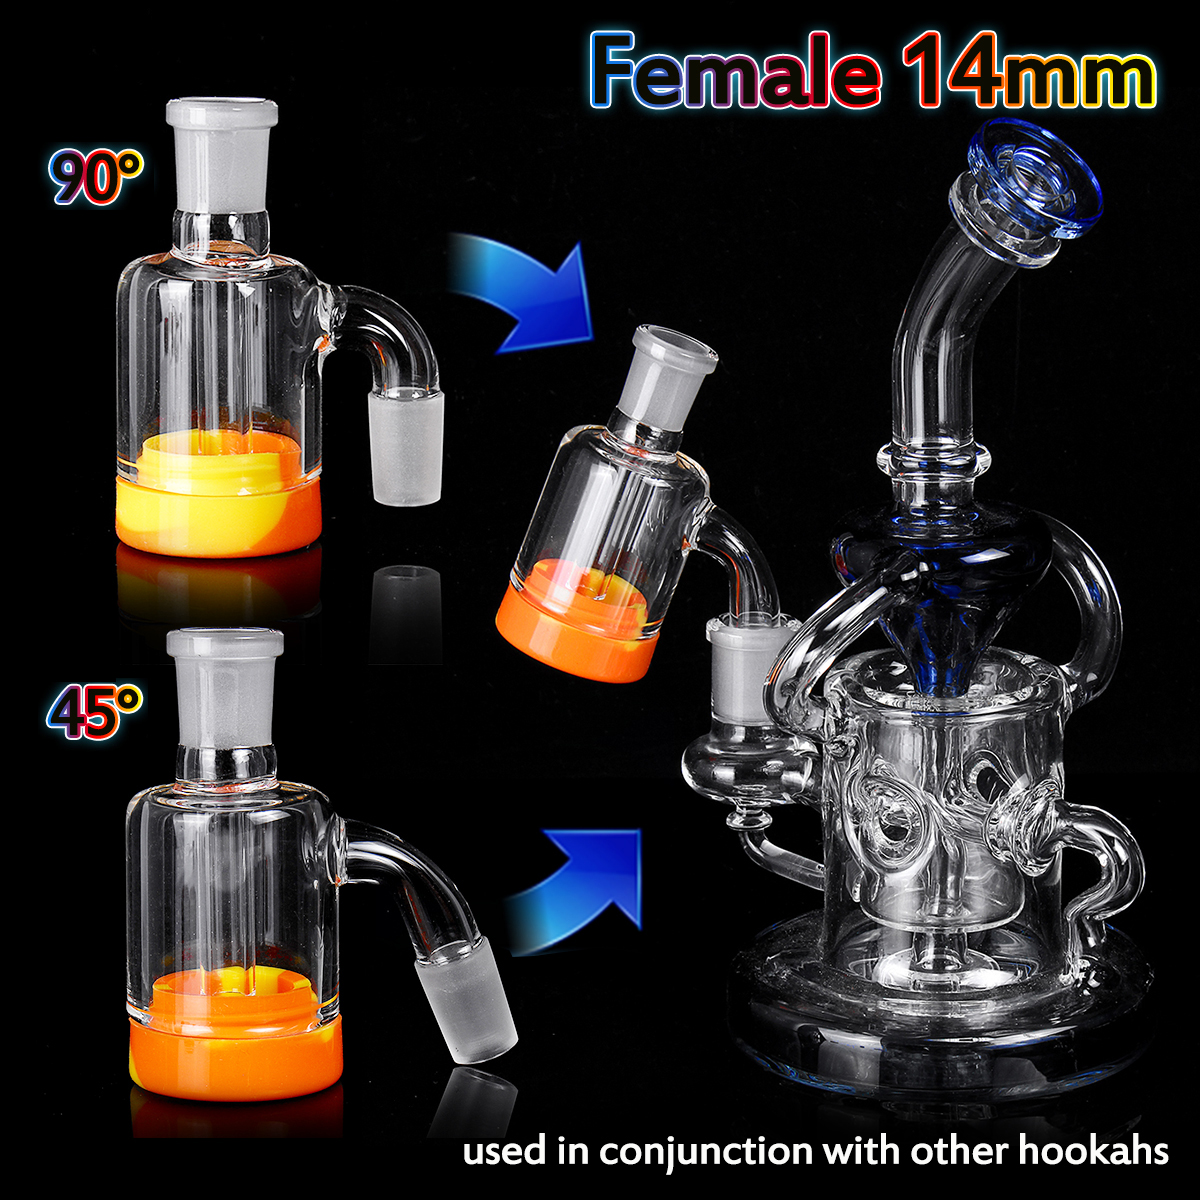 14mm Female Glass Adapter 45 or 90 degree Glass Joint Glass Collector